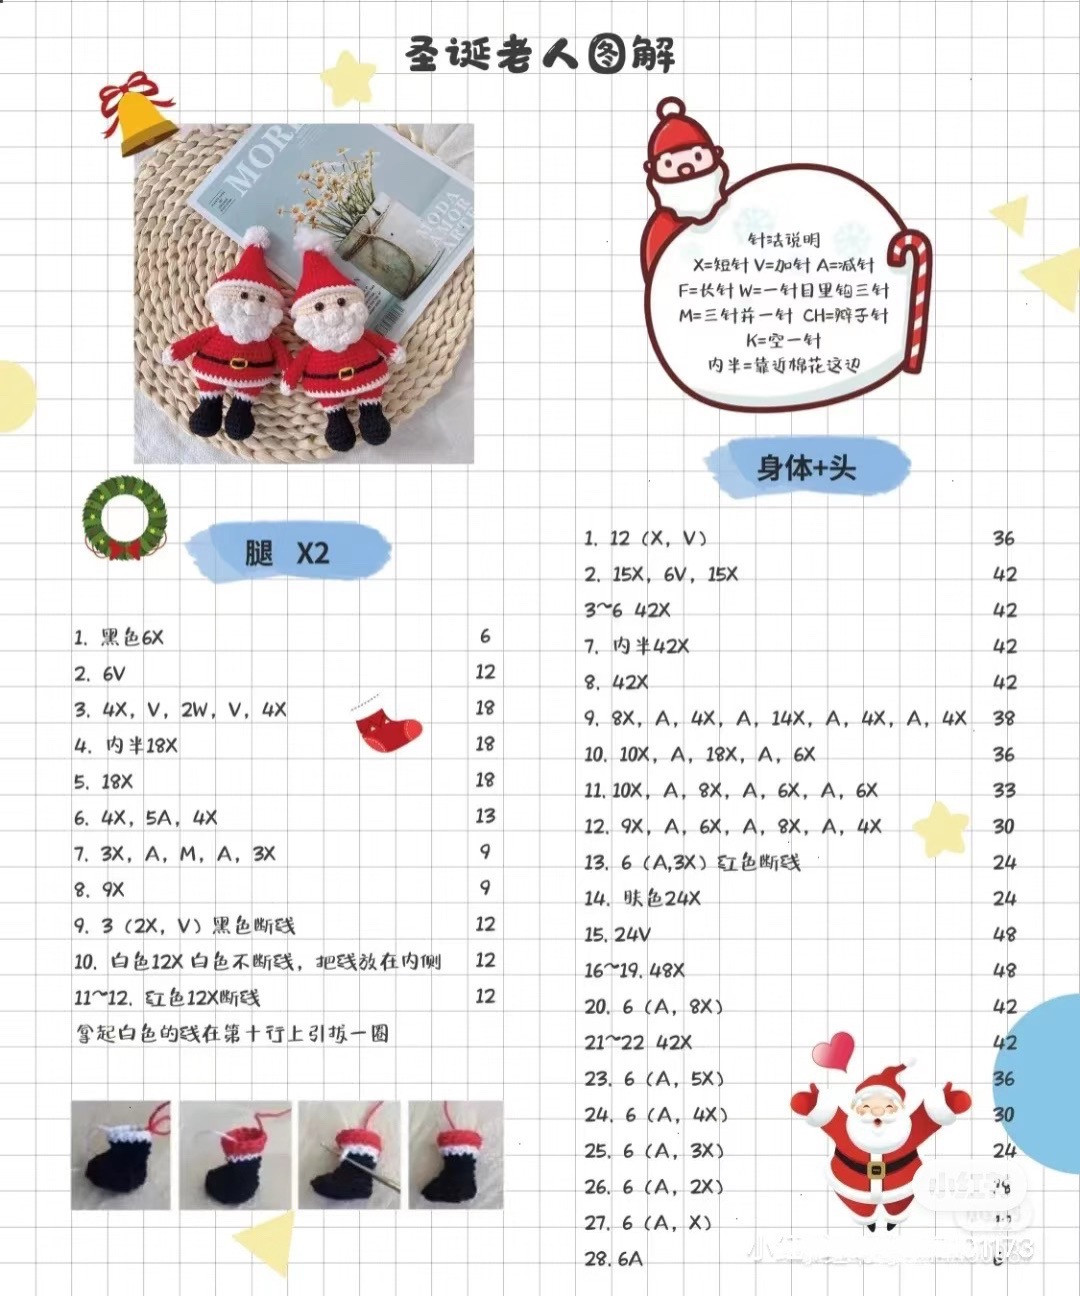 Crochet pattern of Santa Claus wearing a red hat and red clothes